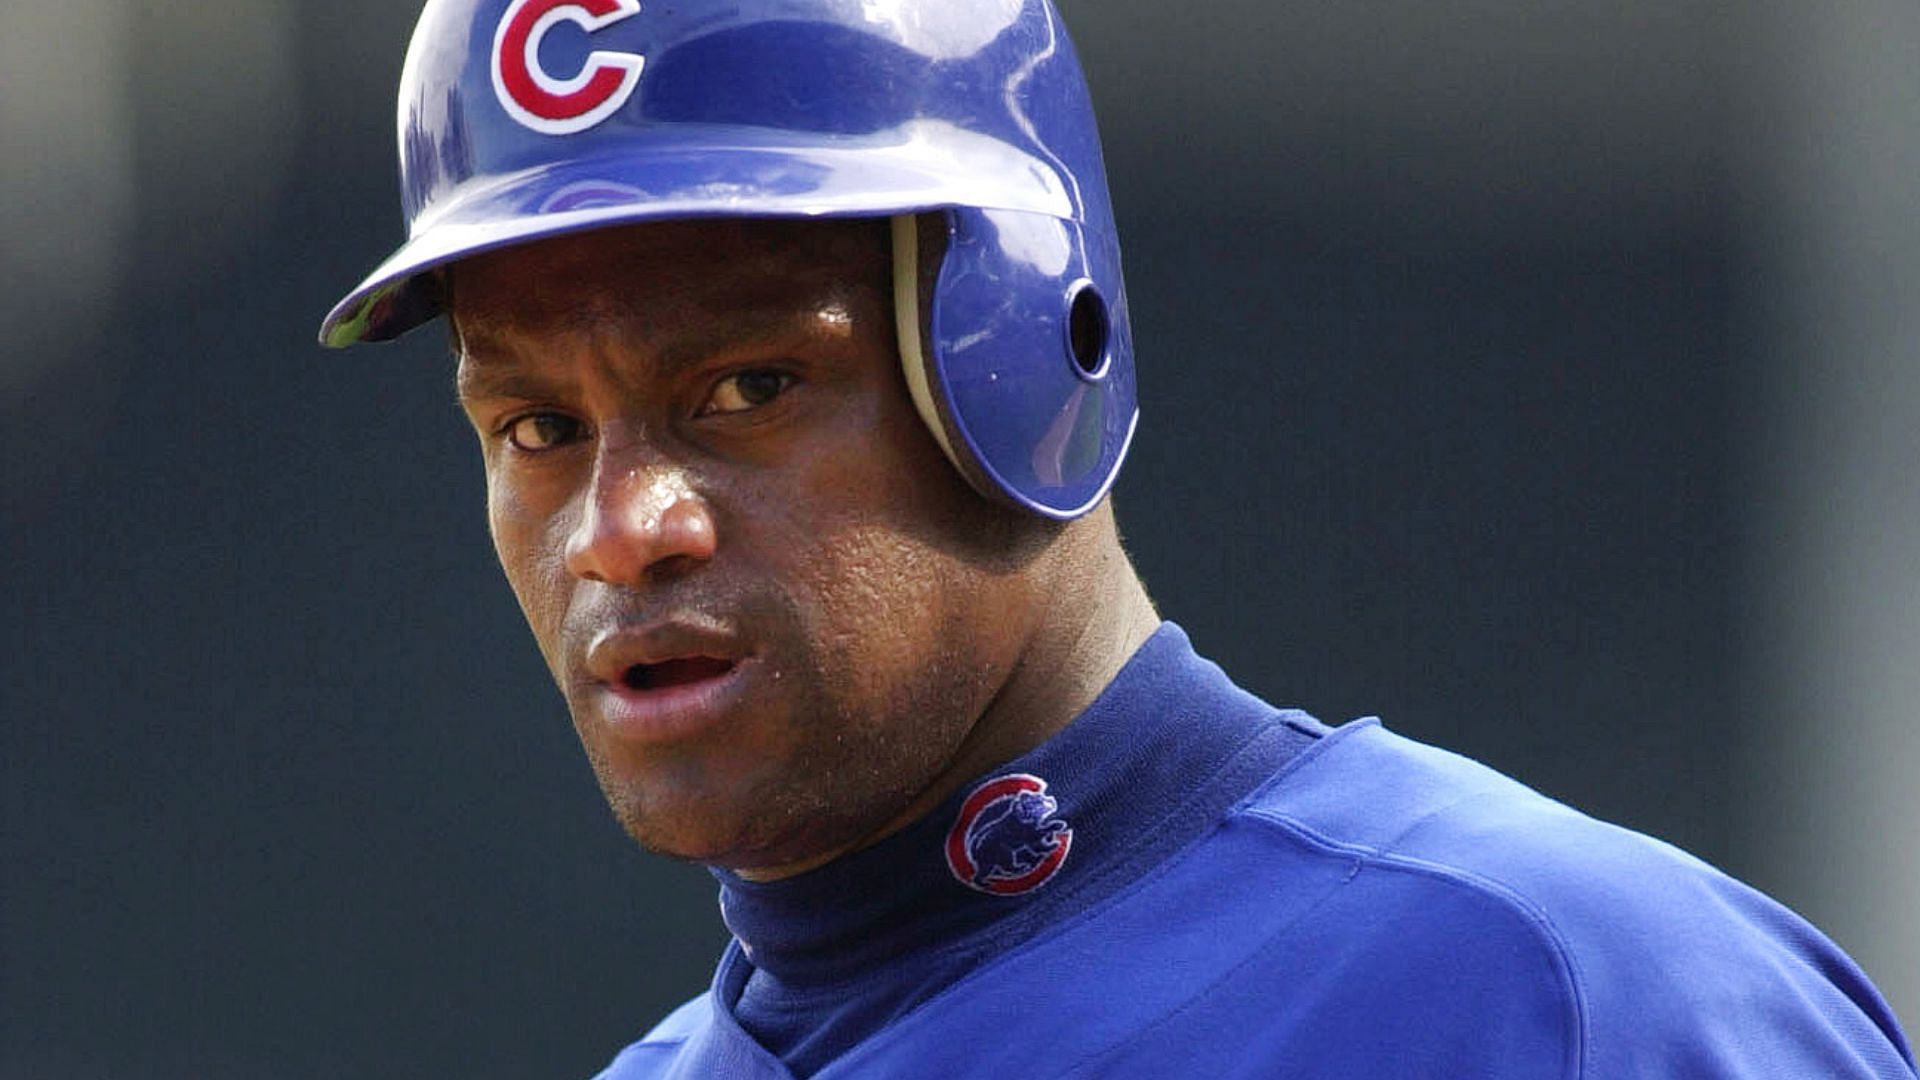 When Sammy Sosa fiercely rejected allegations of PED usage in